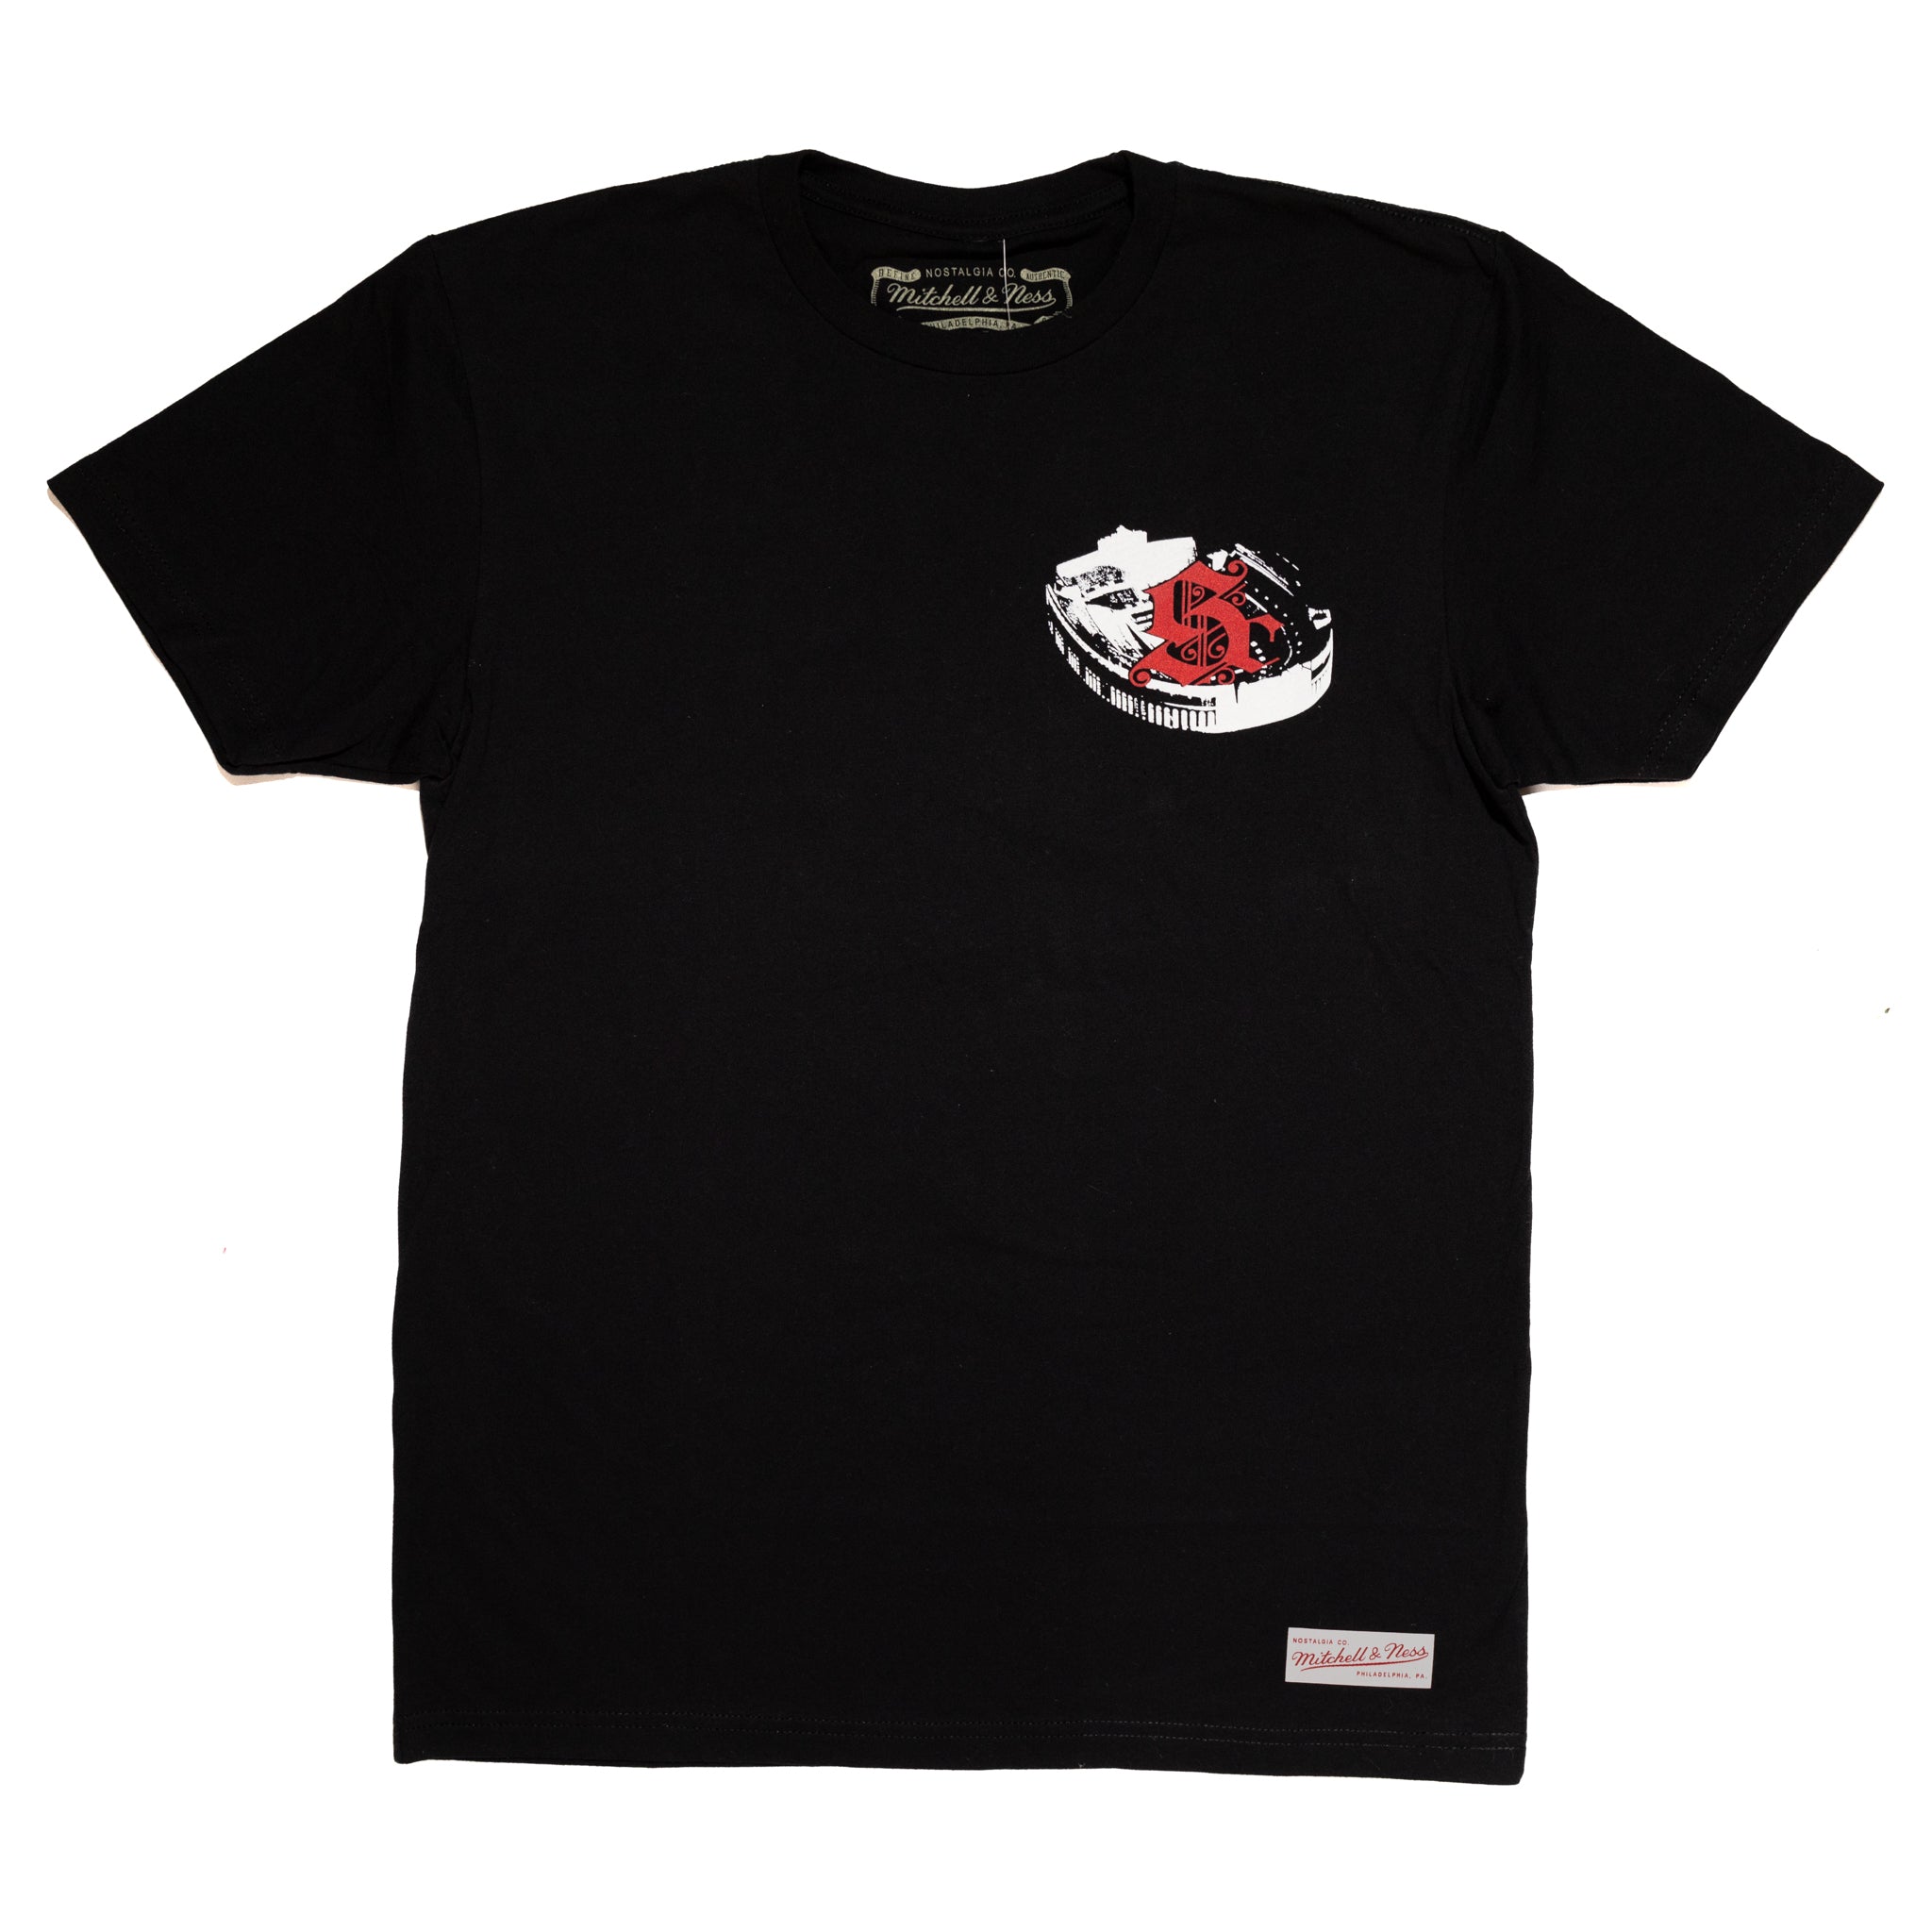 Sole Classics x Mitchell & Ness From The Shoe With Love Tee